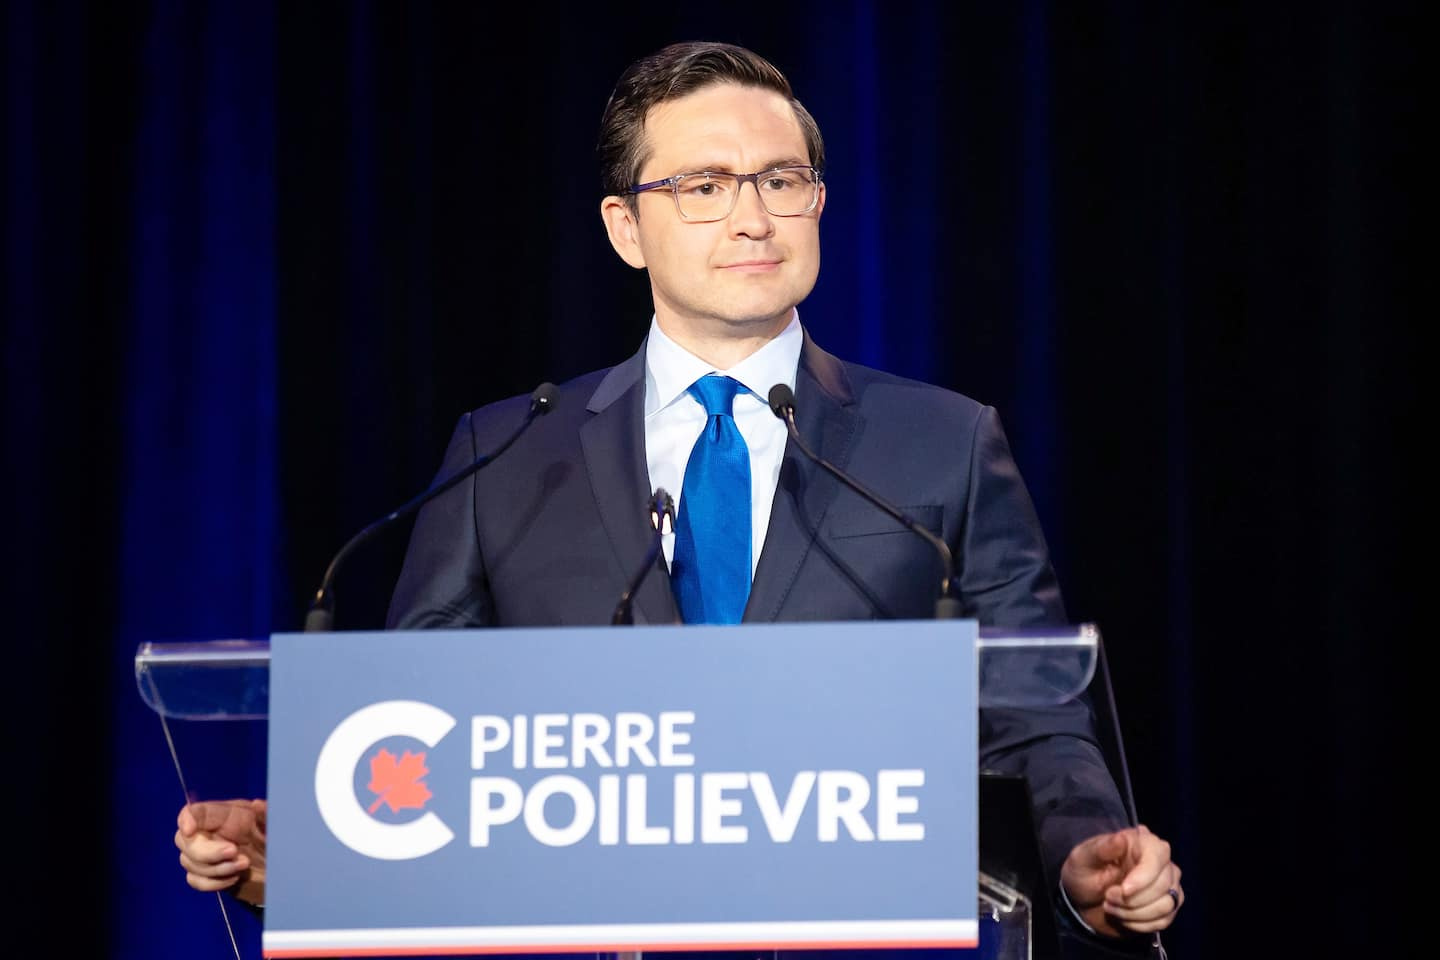 A tax and spending freeze called for by Poilievre